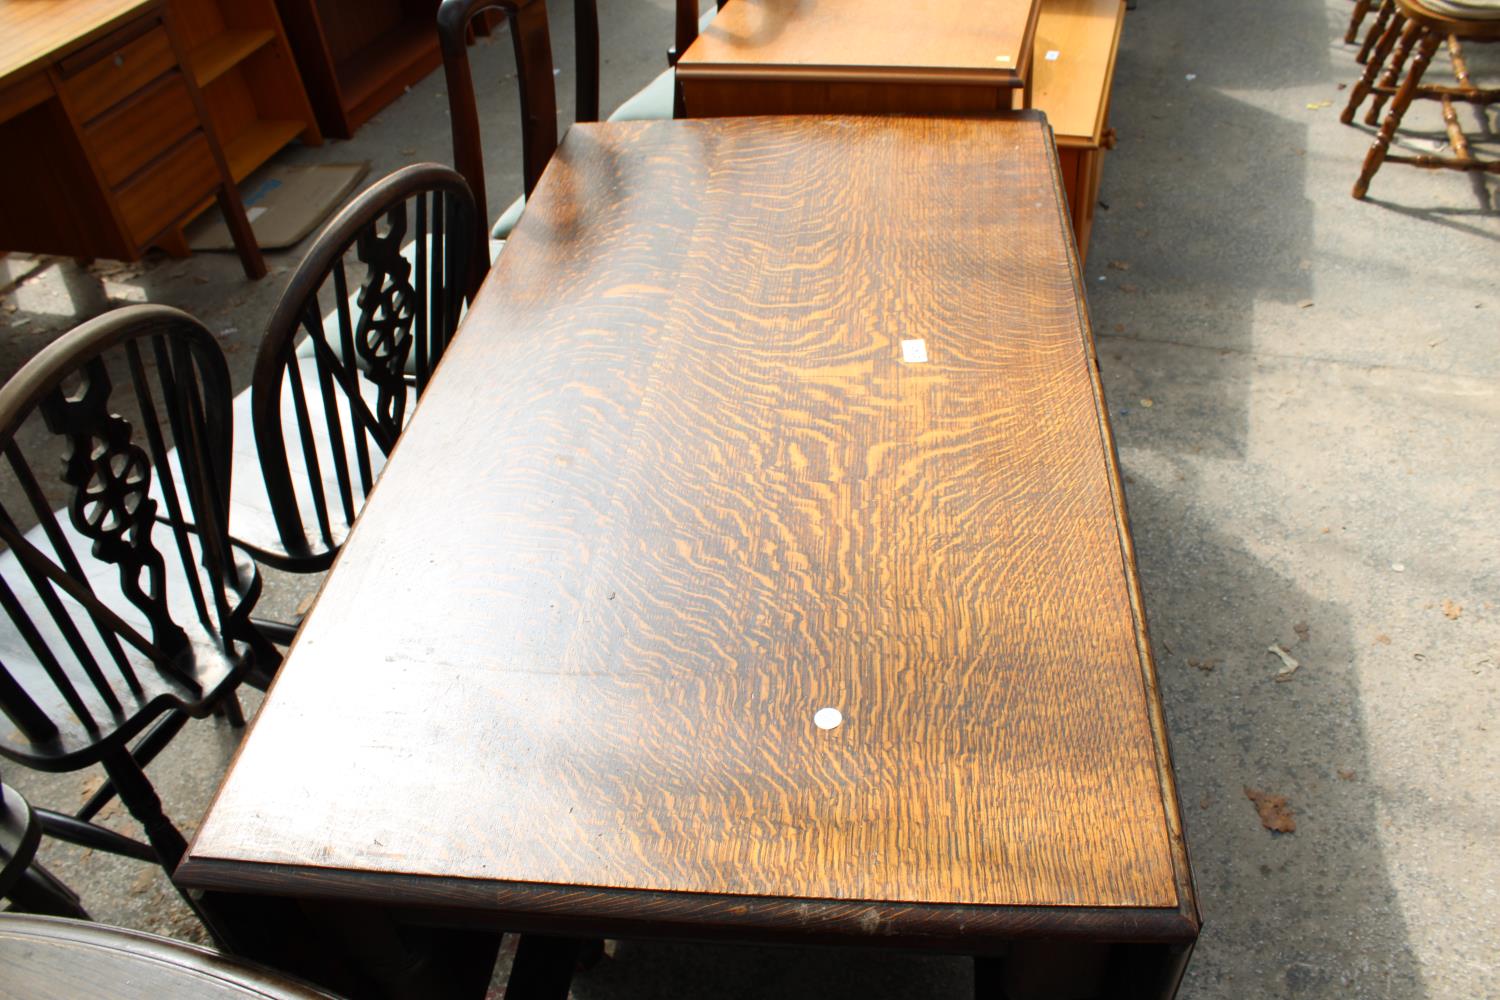 AN EARLY 20TH CENTURY OAK GATE-LEG DINING TABLE - Image 3 of 3